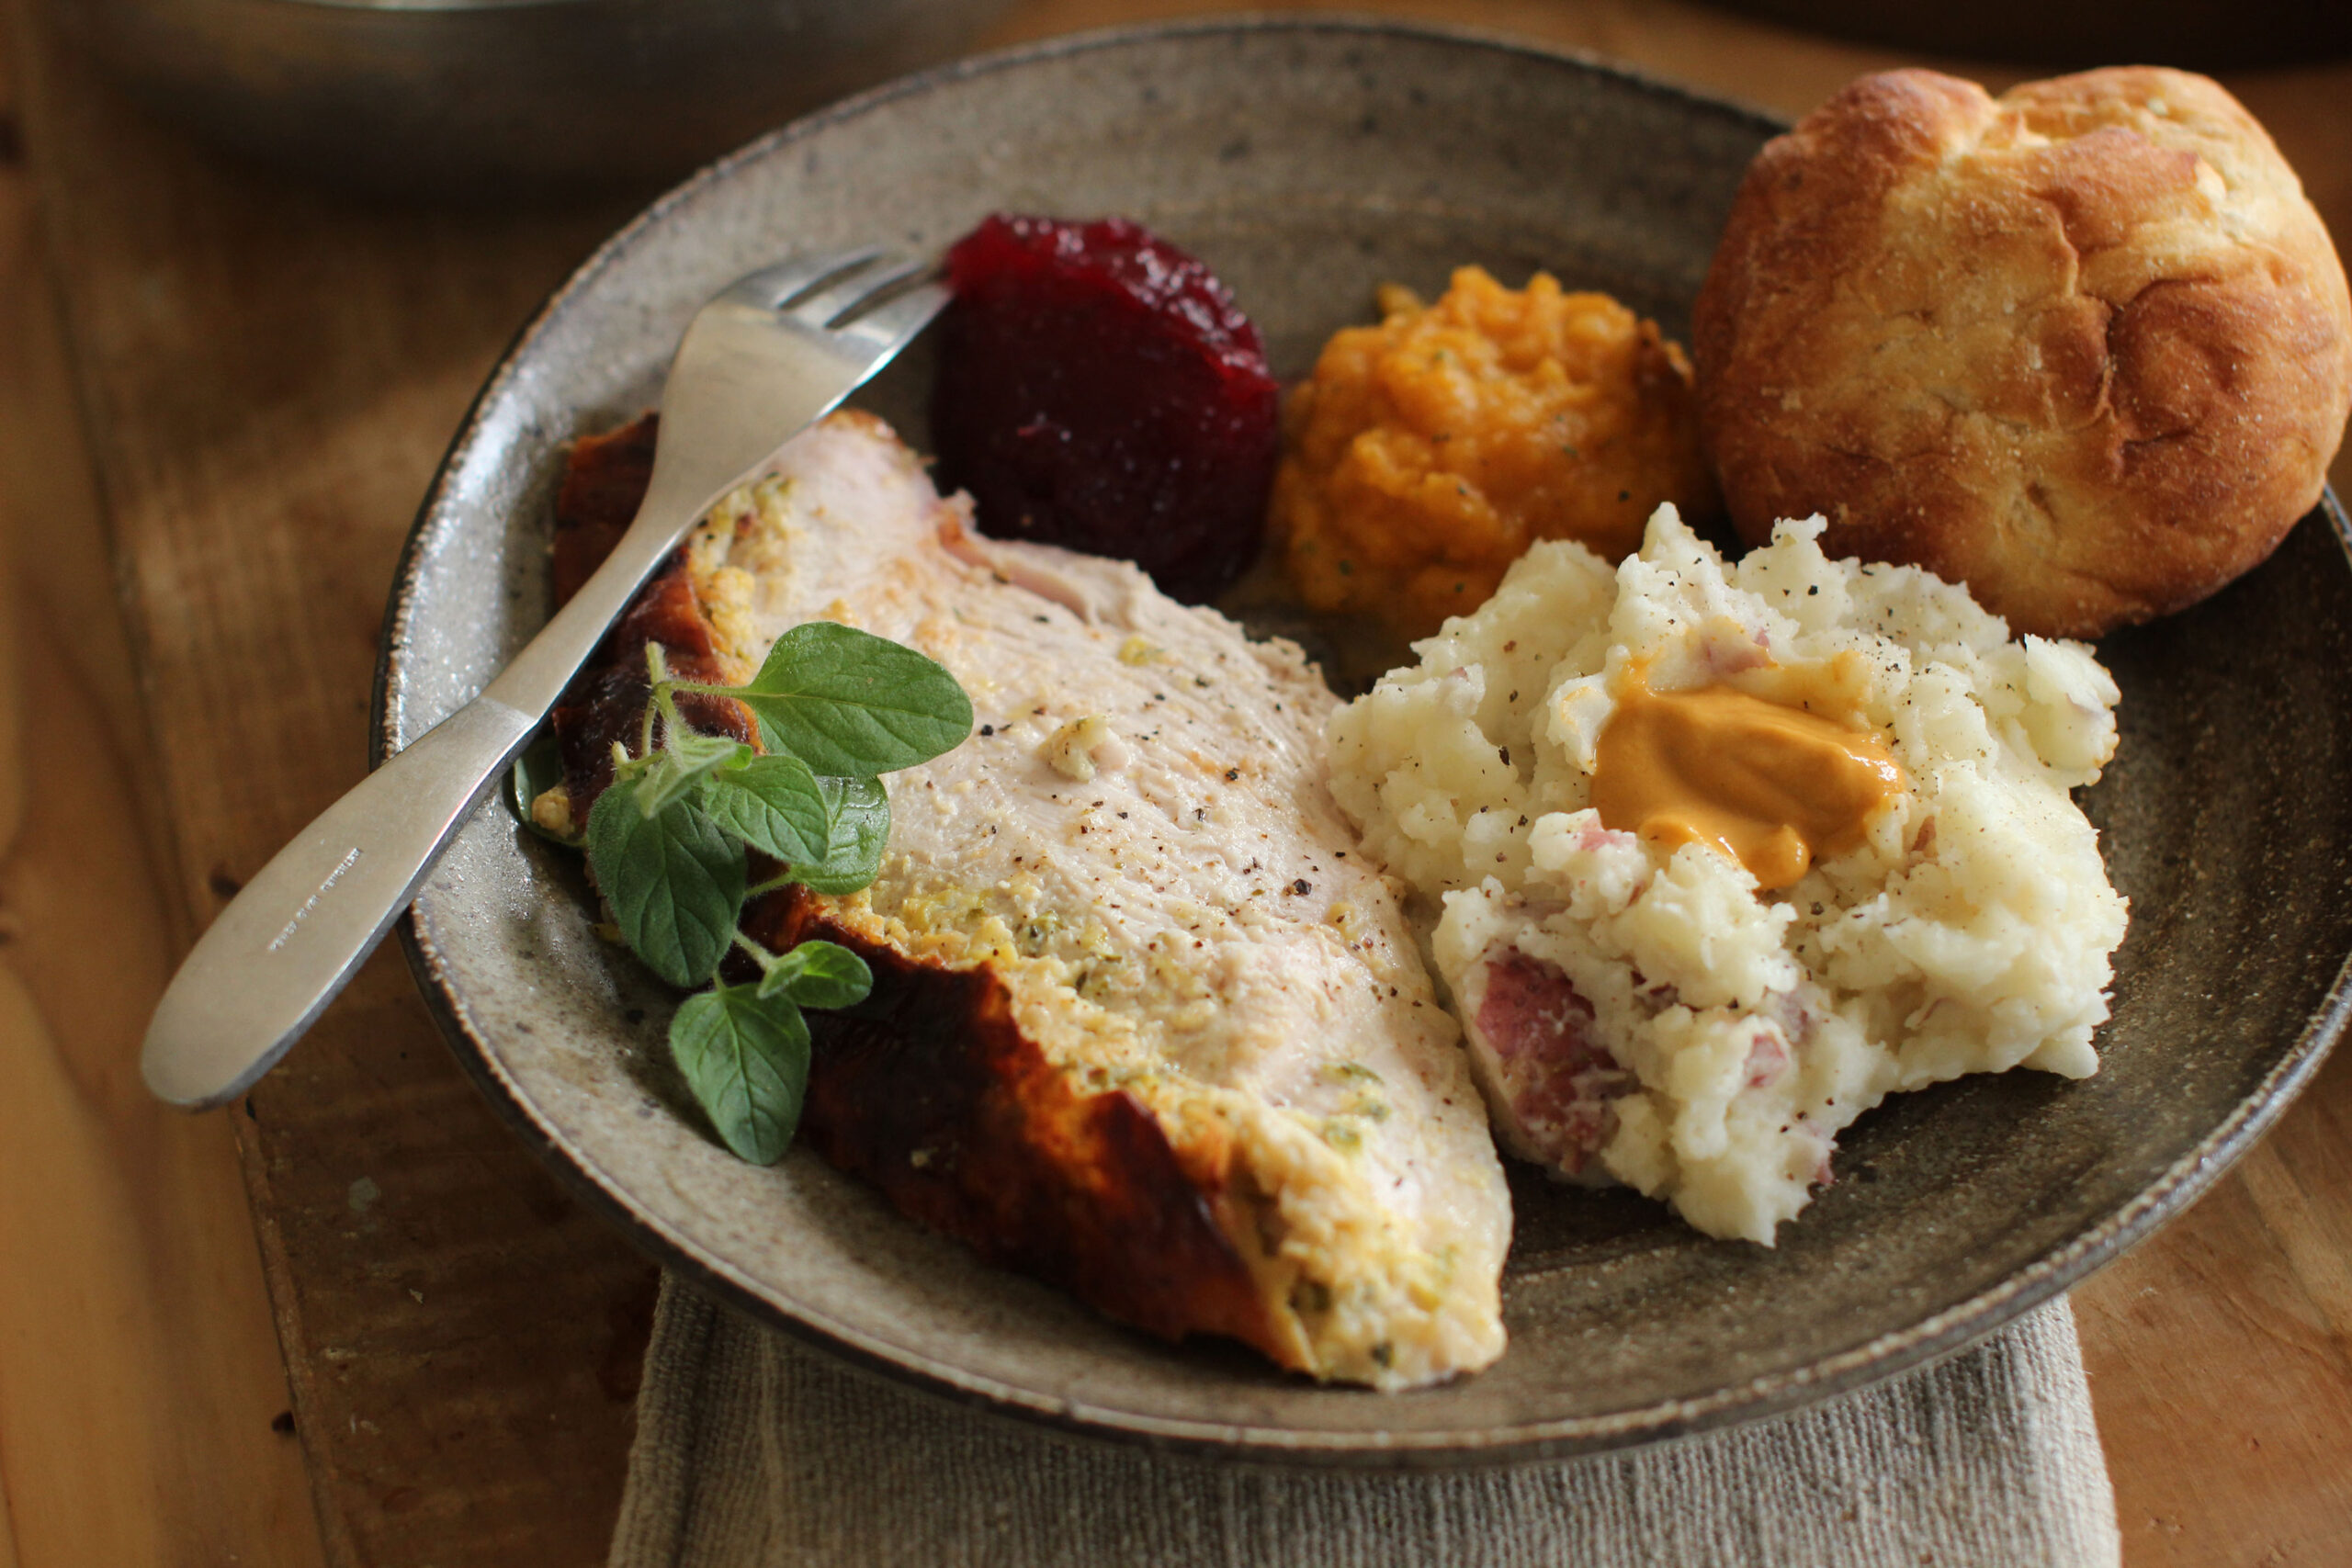 A dinner plate with turkey, cranberry sauce, mashed potato and a dinner roll.